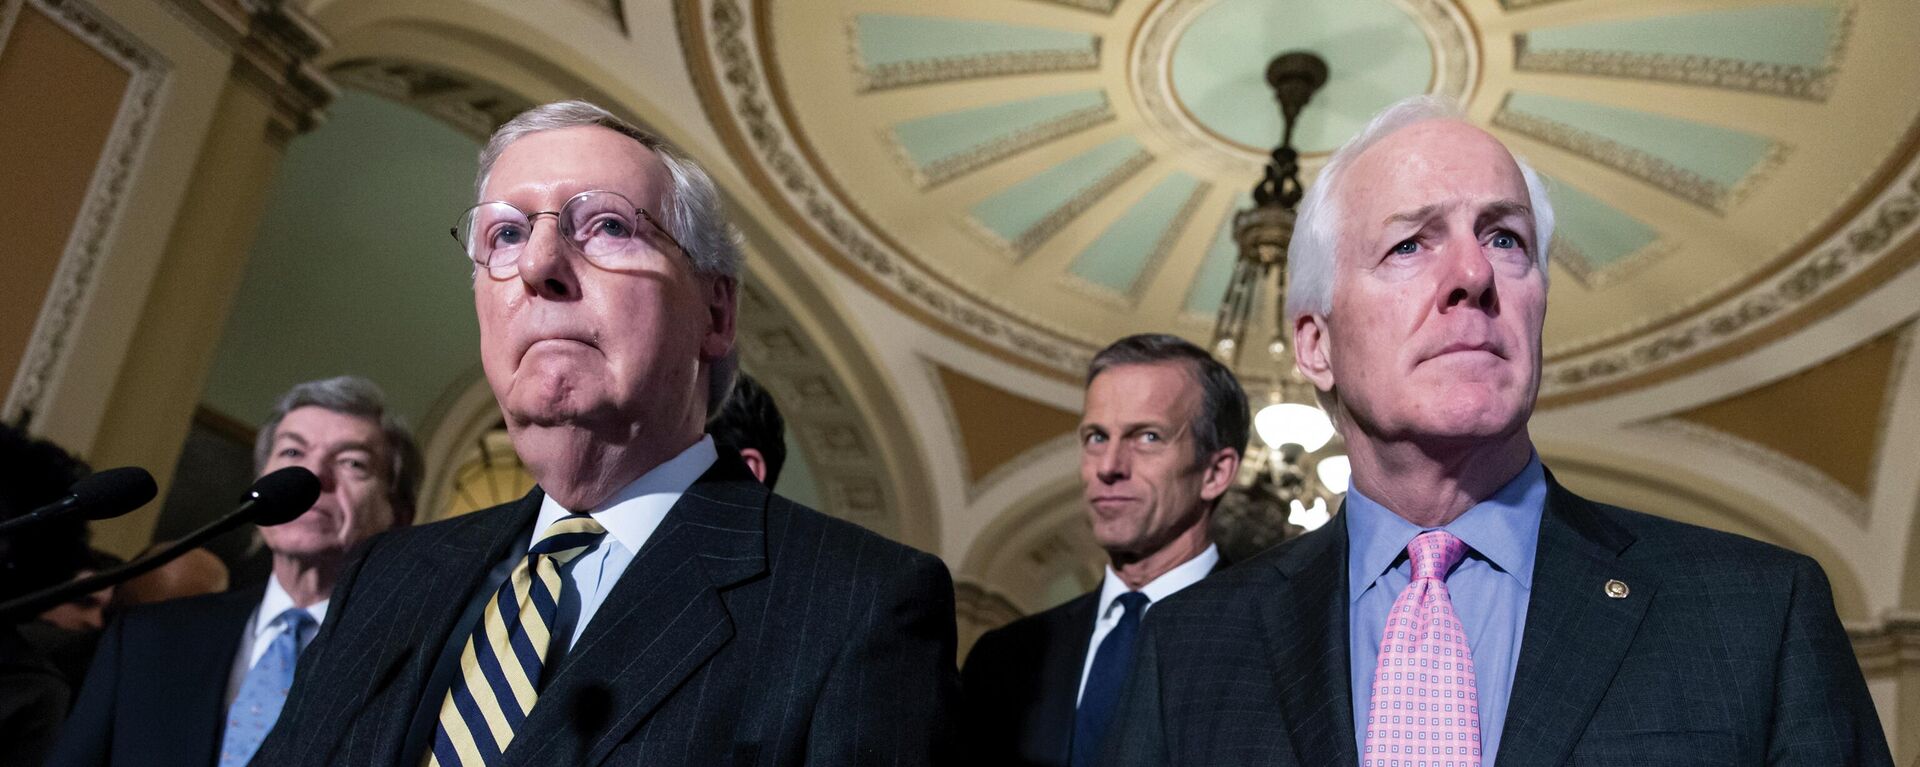 Sen. Mitch McConnell, R-Ky., left, and Sen. John Cornyn, R-Texas, right, talk to reporters following a closed-door policy meeting at the Capitol in Washington, Tuesday, March 8, 2016. In the aftermath of recent horrific mass shootings in Uvalde, Texas and Buffalo, New York, a bipartisan group of senators, including Cornyn and Sen. Chris Murphy, D-Conn., are holding private virtual meetings during recess to try to strike a compromise over gun safety legislation.  - Sputnik International, 1920, 23.06.2022